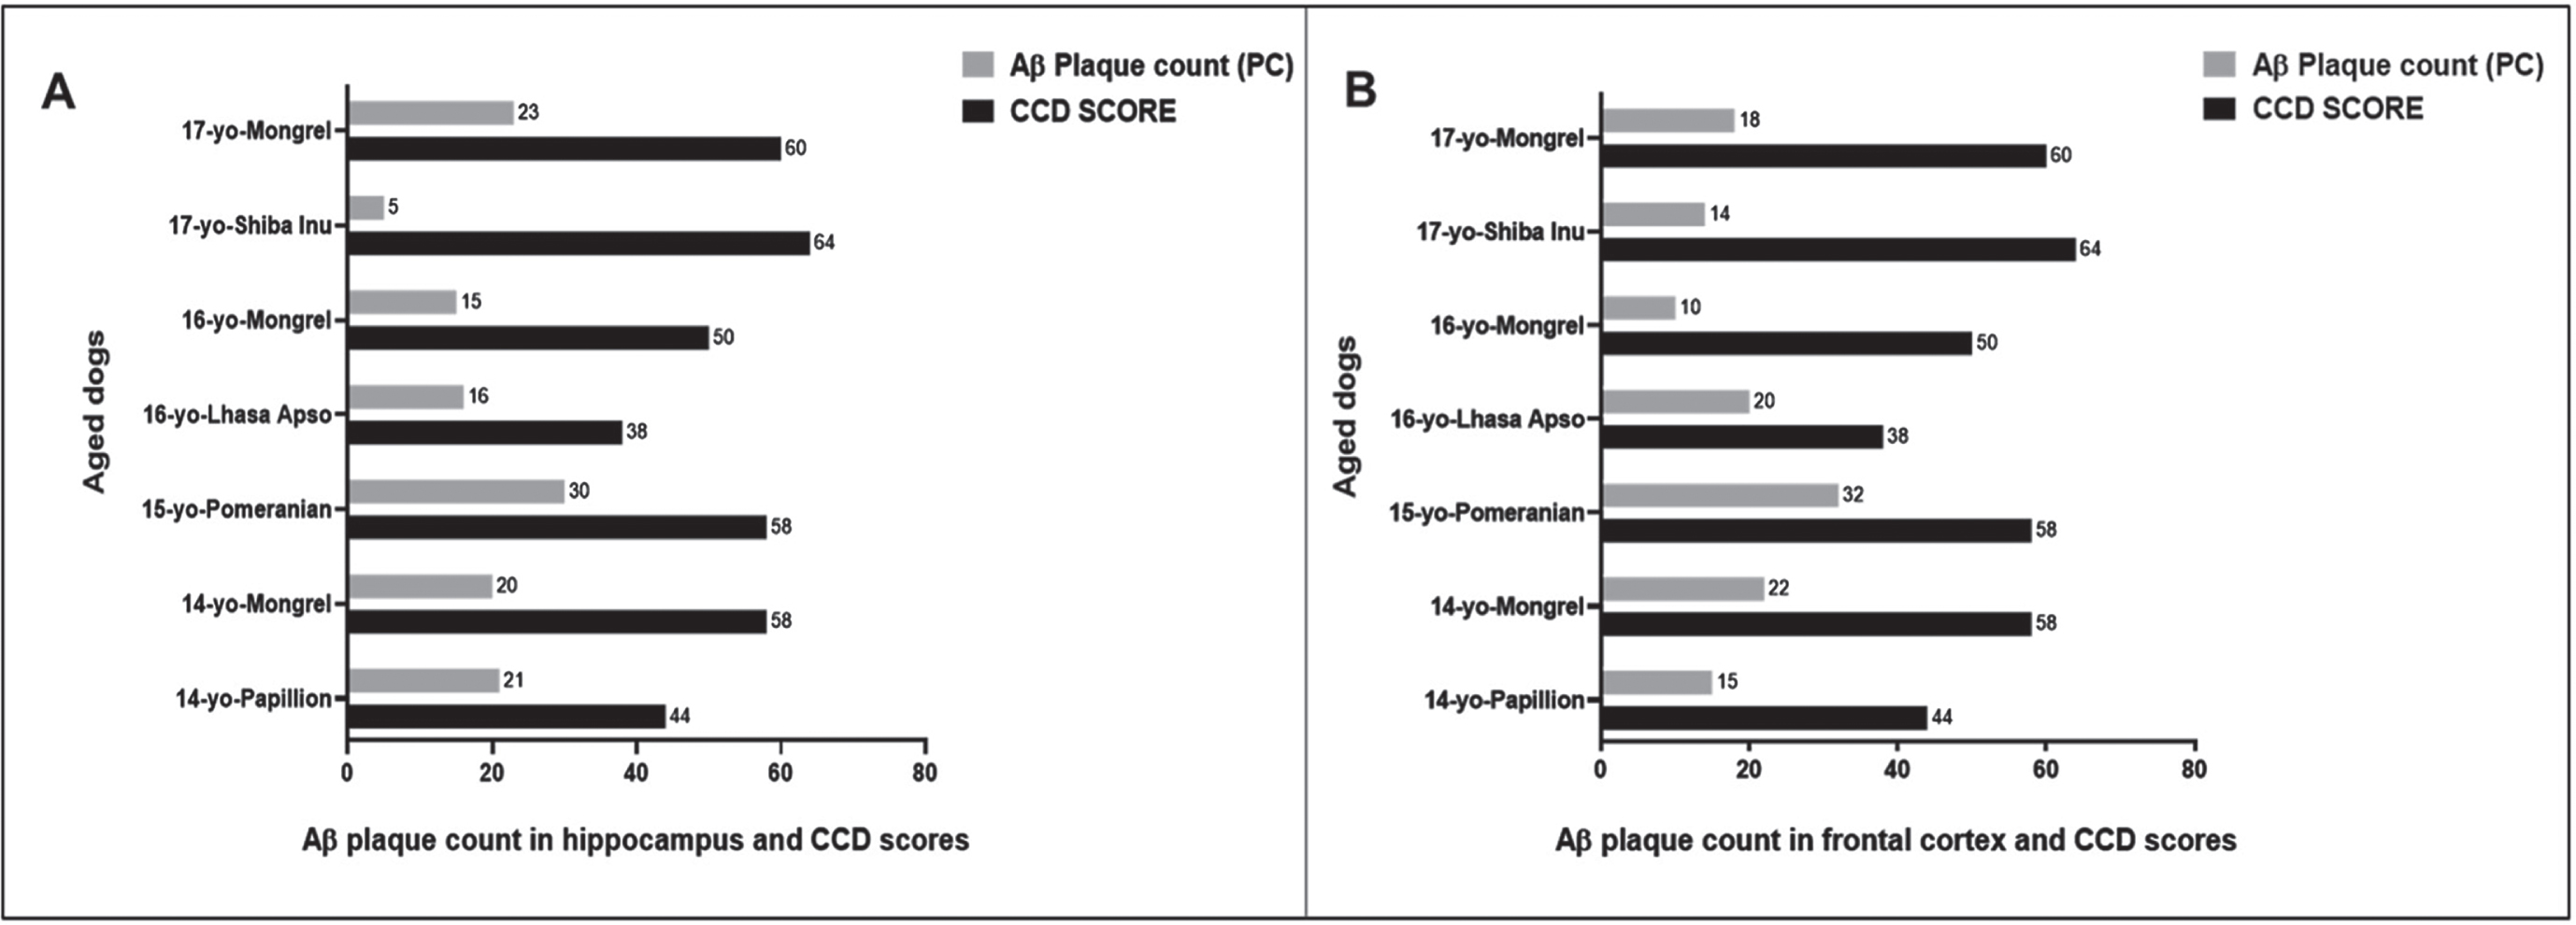 Comparing the CCD Scores with hippocampal and cortical Aβ plaque count (PC) in seven aged dogs. CCD score of ≥50 were considered as CCD or dog dementia. Aβ PC was calculated from whole tissue sections at high power fields (40x). PC of Aβ plaques: < 10 considered as low, 10–20 as moderate, and > 20 as high in the hippocampus and frontal cortex. A small size male Pomeranian with CCD score of 58 displayed the highest PC in the (A) hippocampus, PC = 30 and in the (B) frontal cortex, PC = 32. In contrast, a medium size spayed female Shiba Inu with highest CCD score of 64 exhibited the lowest PC in the (A) hippocampus, PC = 5 and a 16-year-old small size female Mongrel with CCD score of 50 showed the lowest PC in the (B) frontal cortex, PC = 10.